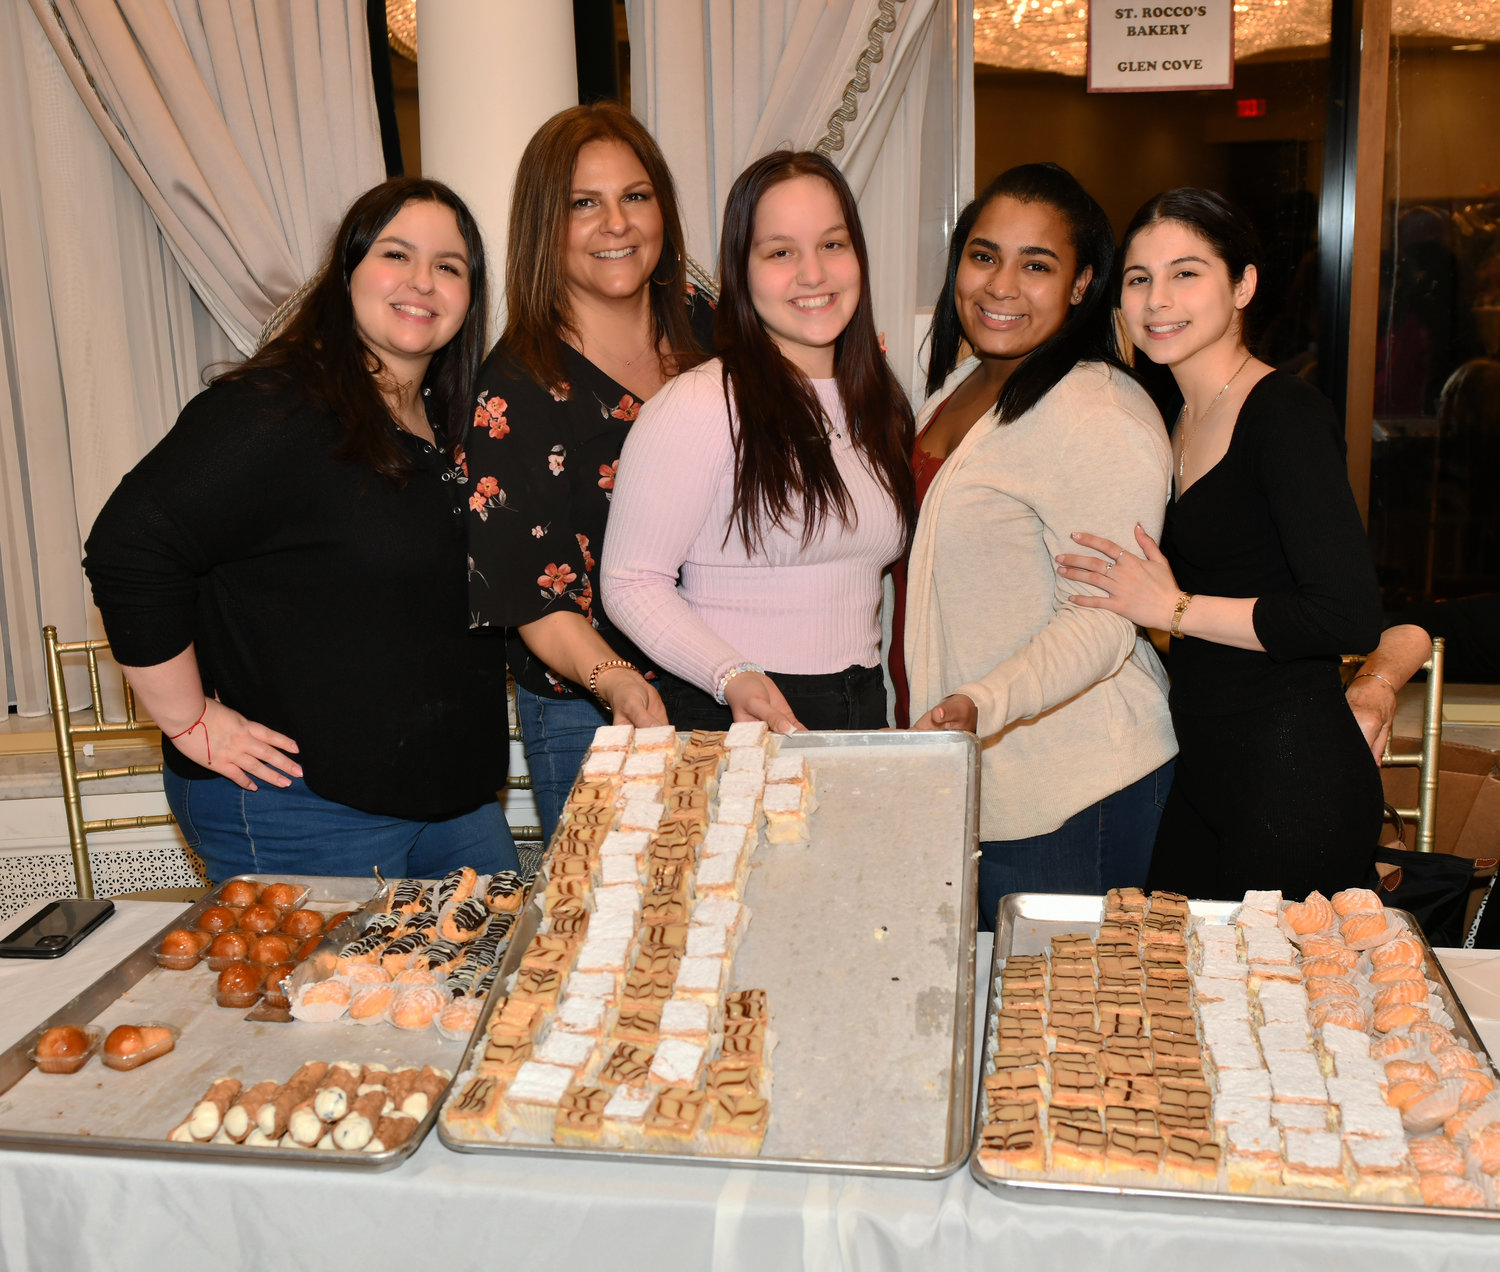 The ladies of St. Rocco’s Bakery  displayed their calorie- worthy treats.